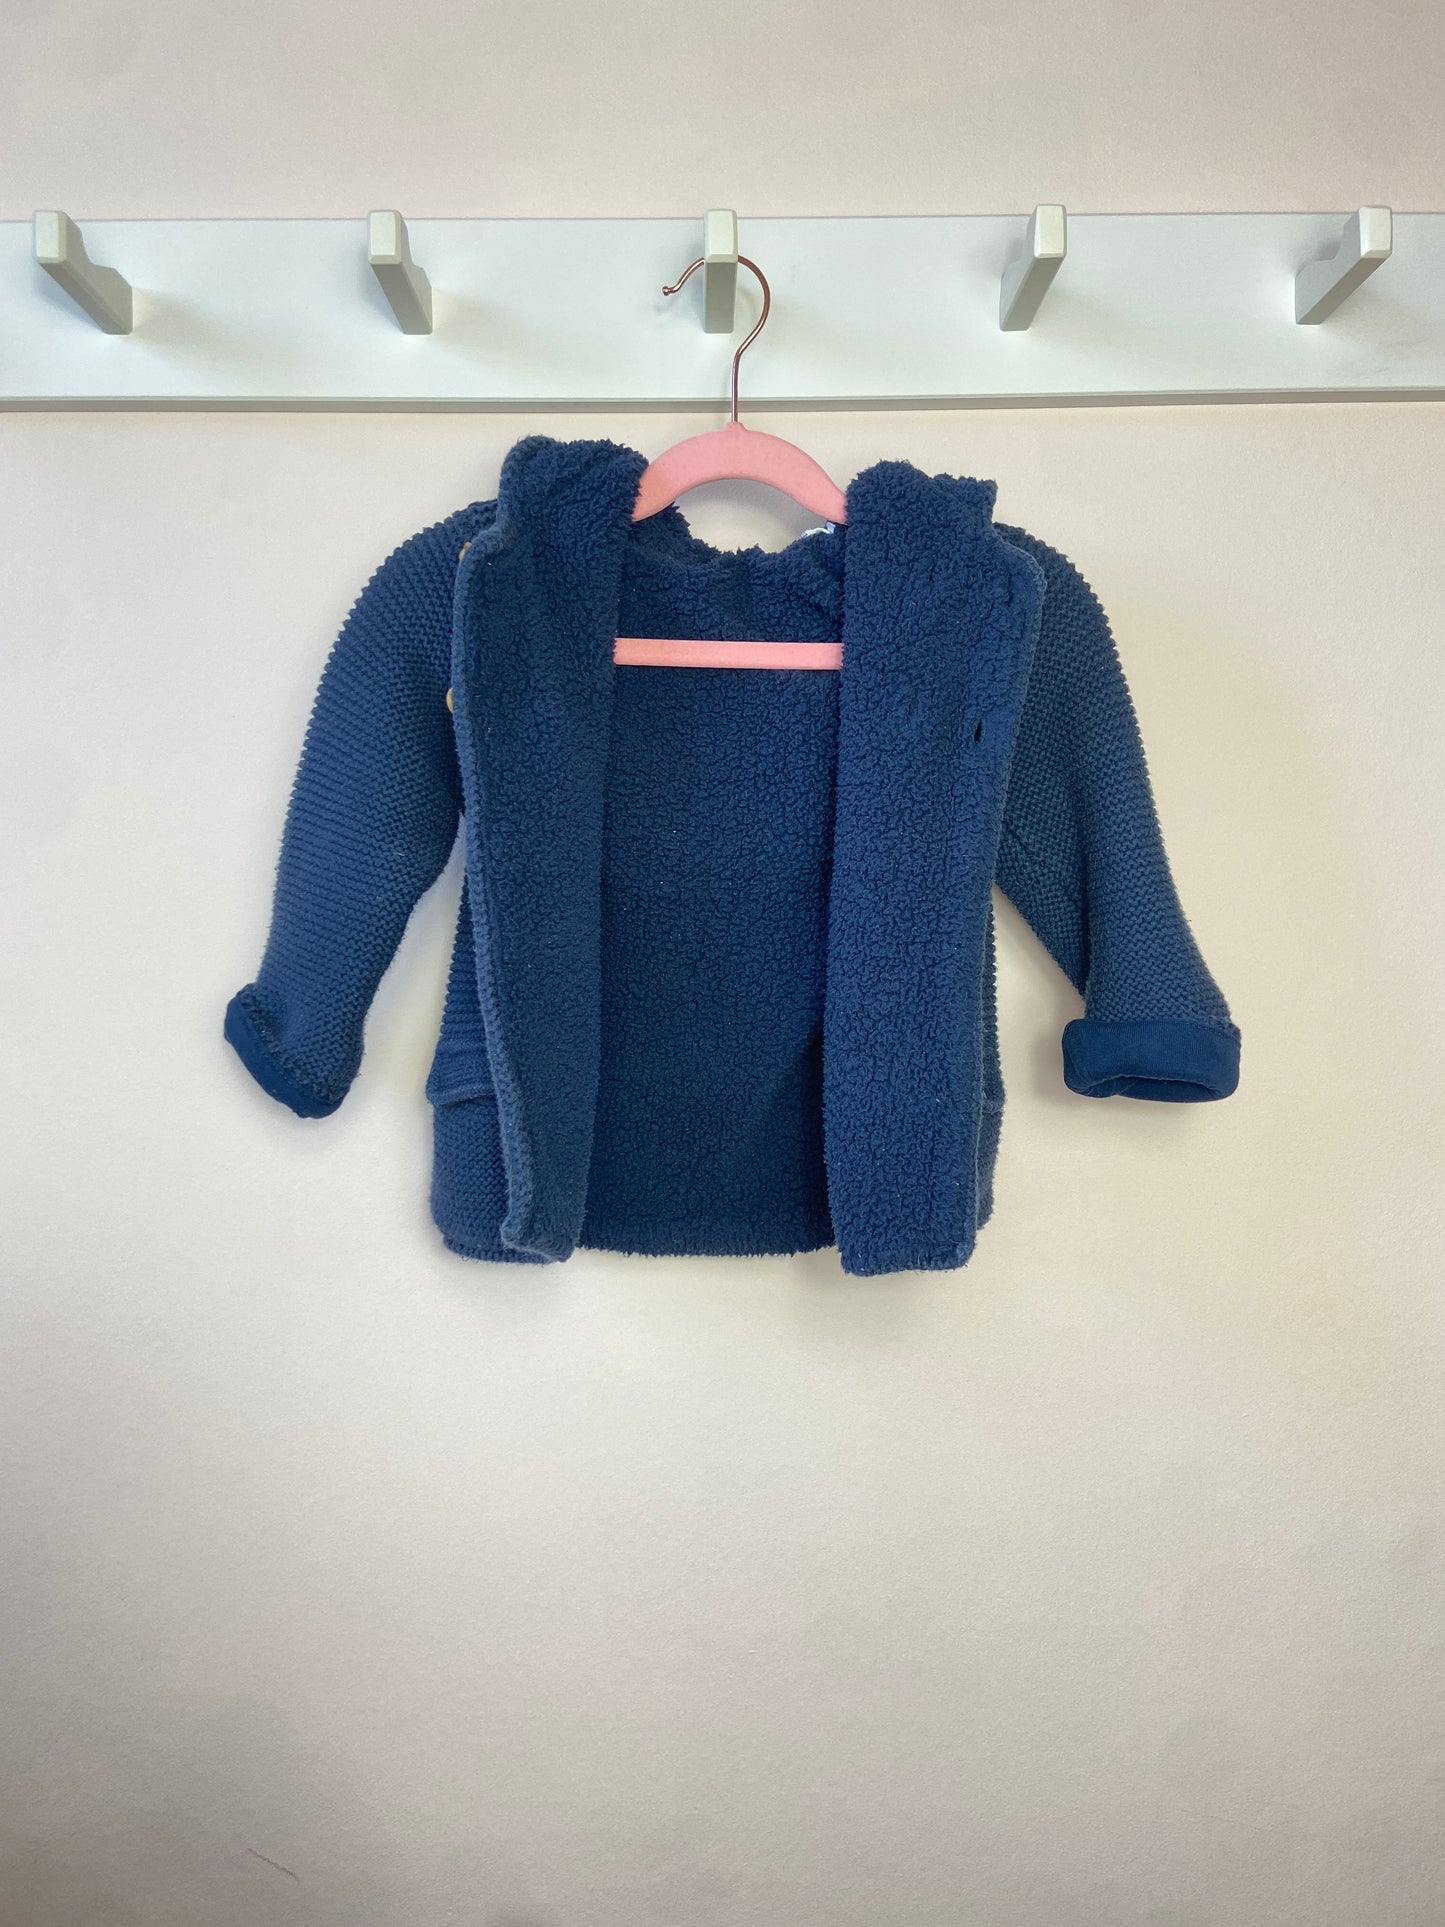 12-18 M Navy knitted jacket